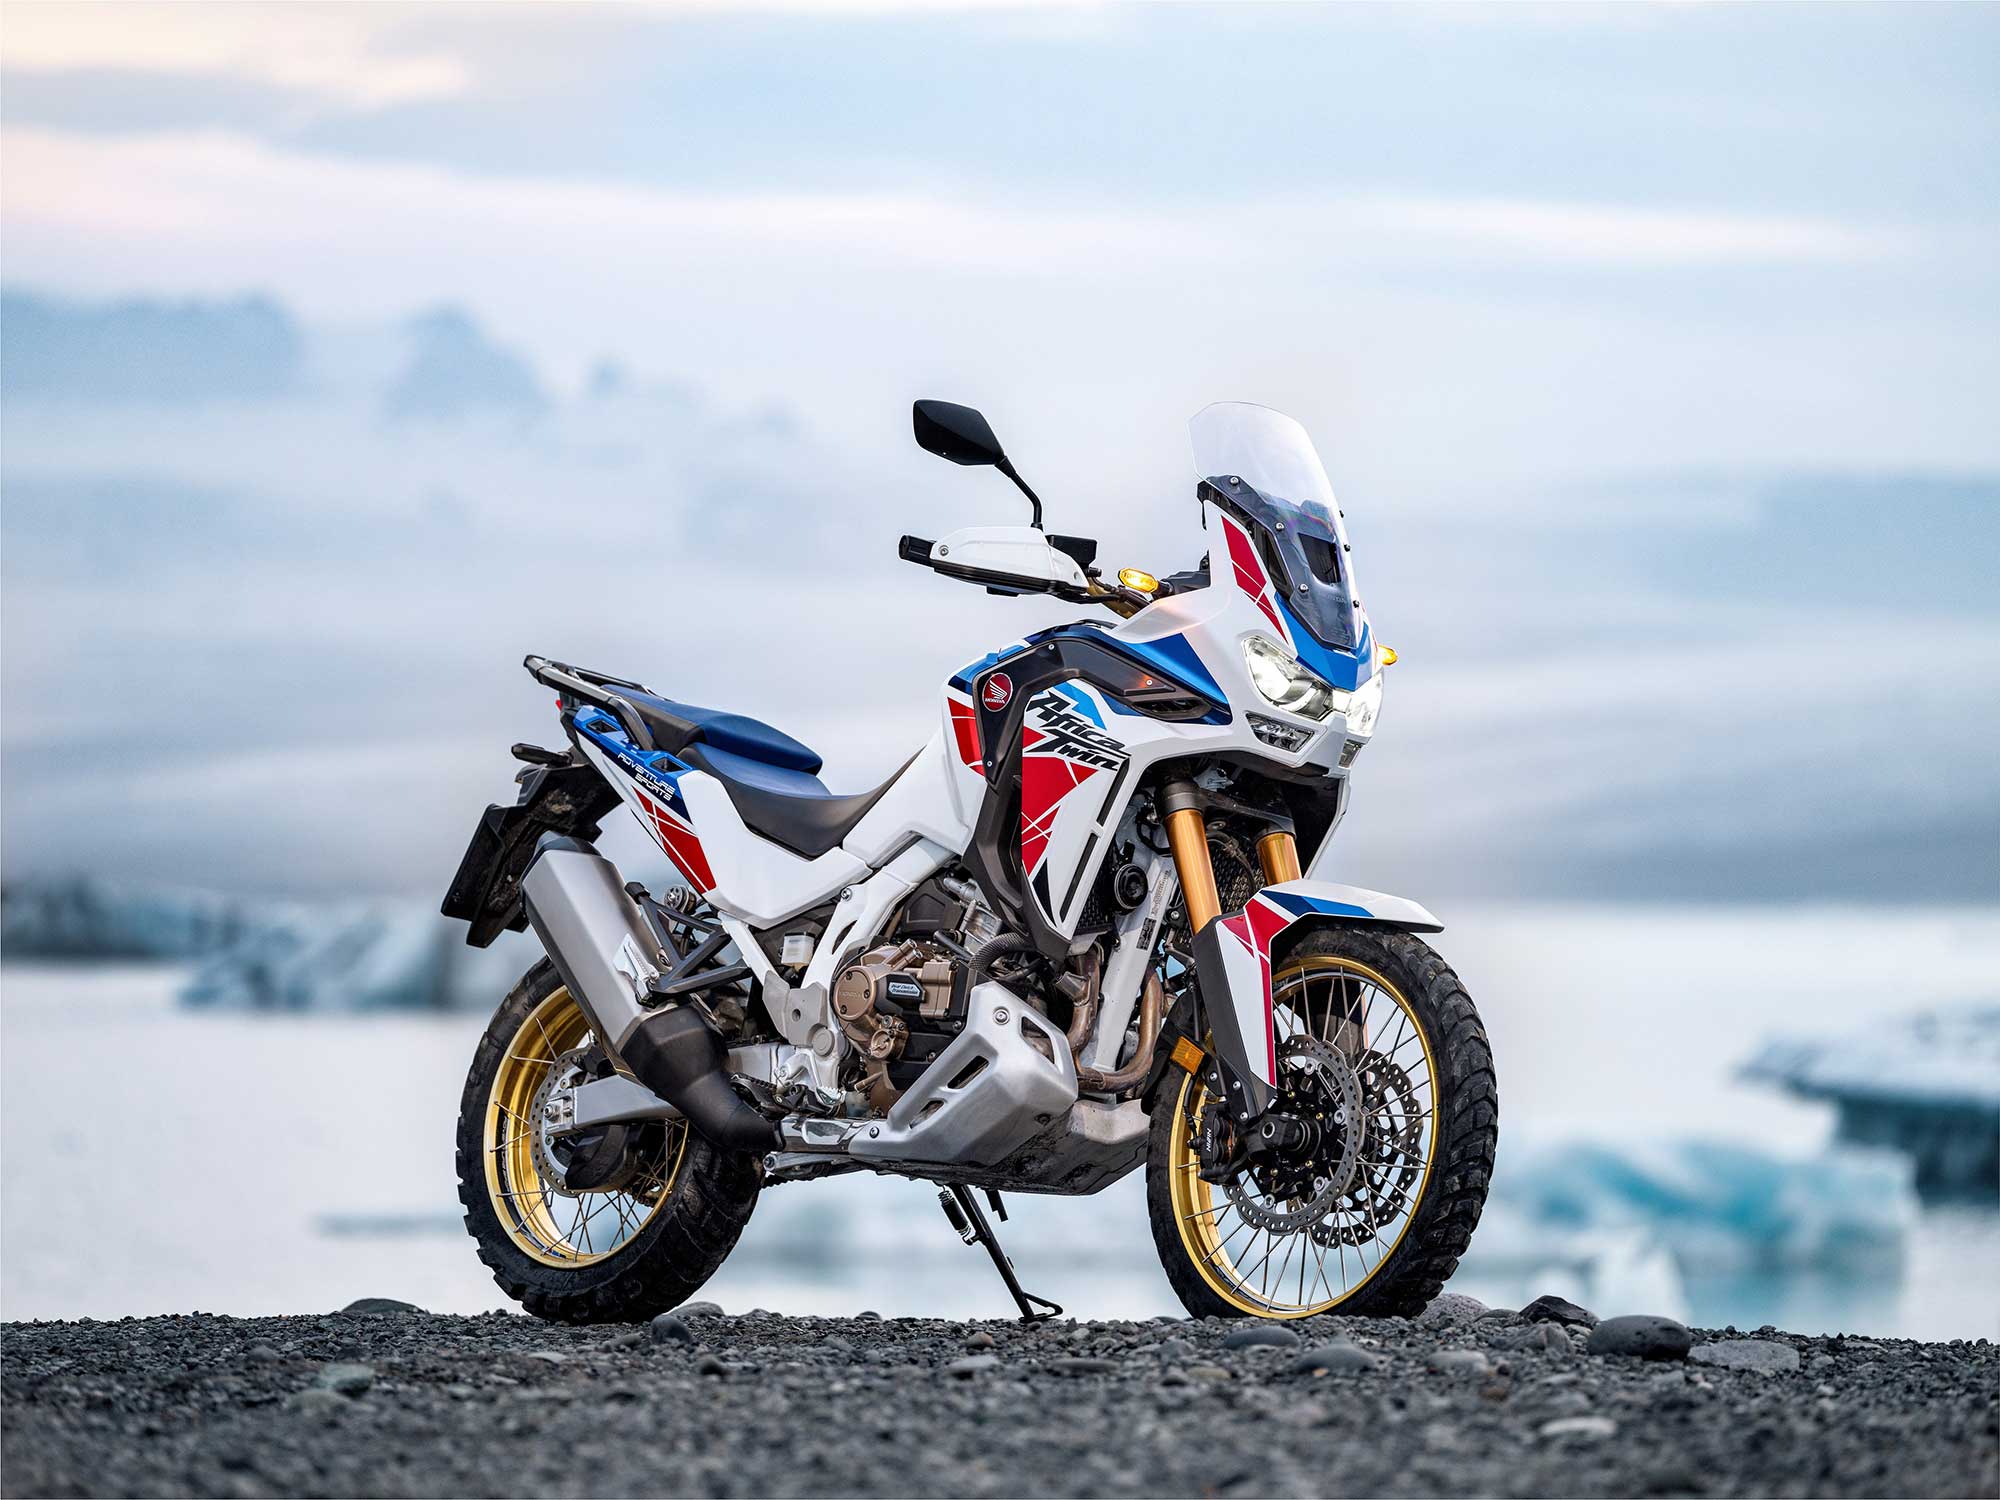 2022 Honda Africa Twin Specifications